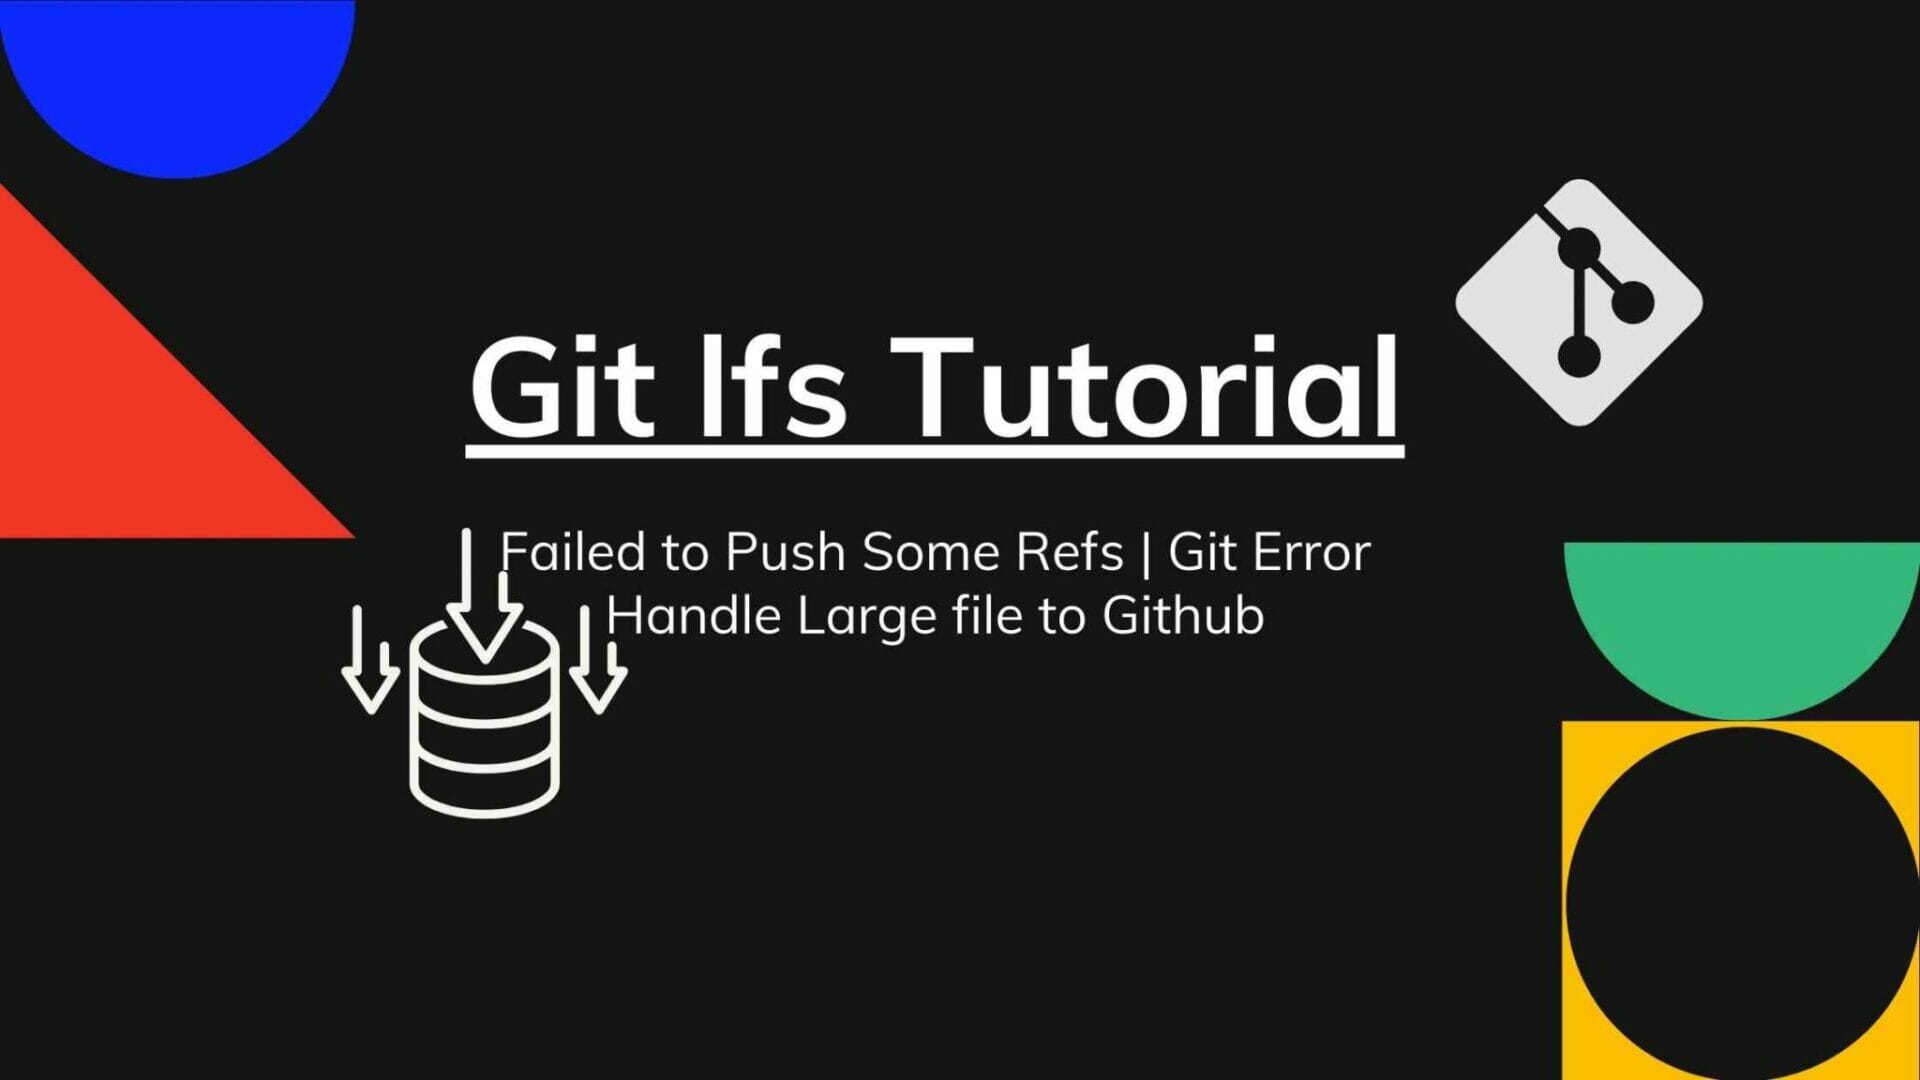 already install git lfs but says limit is 100mb